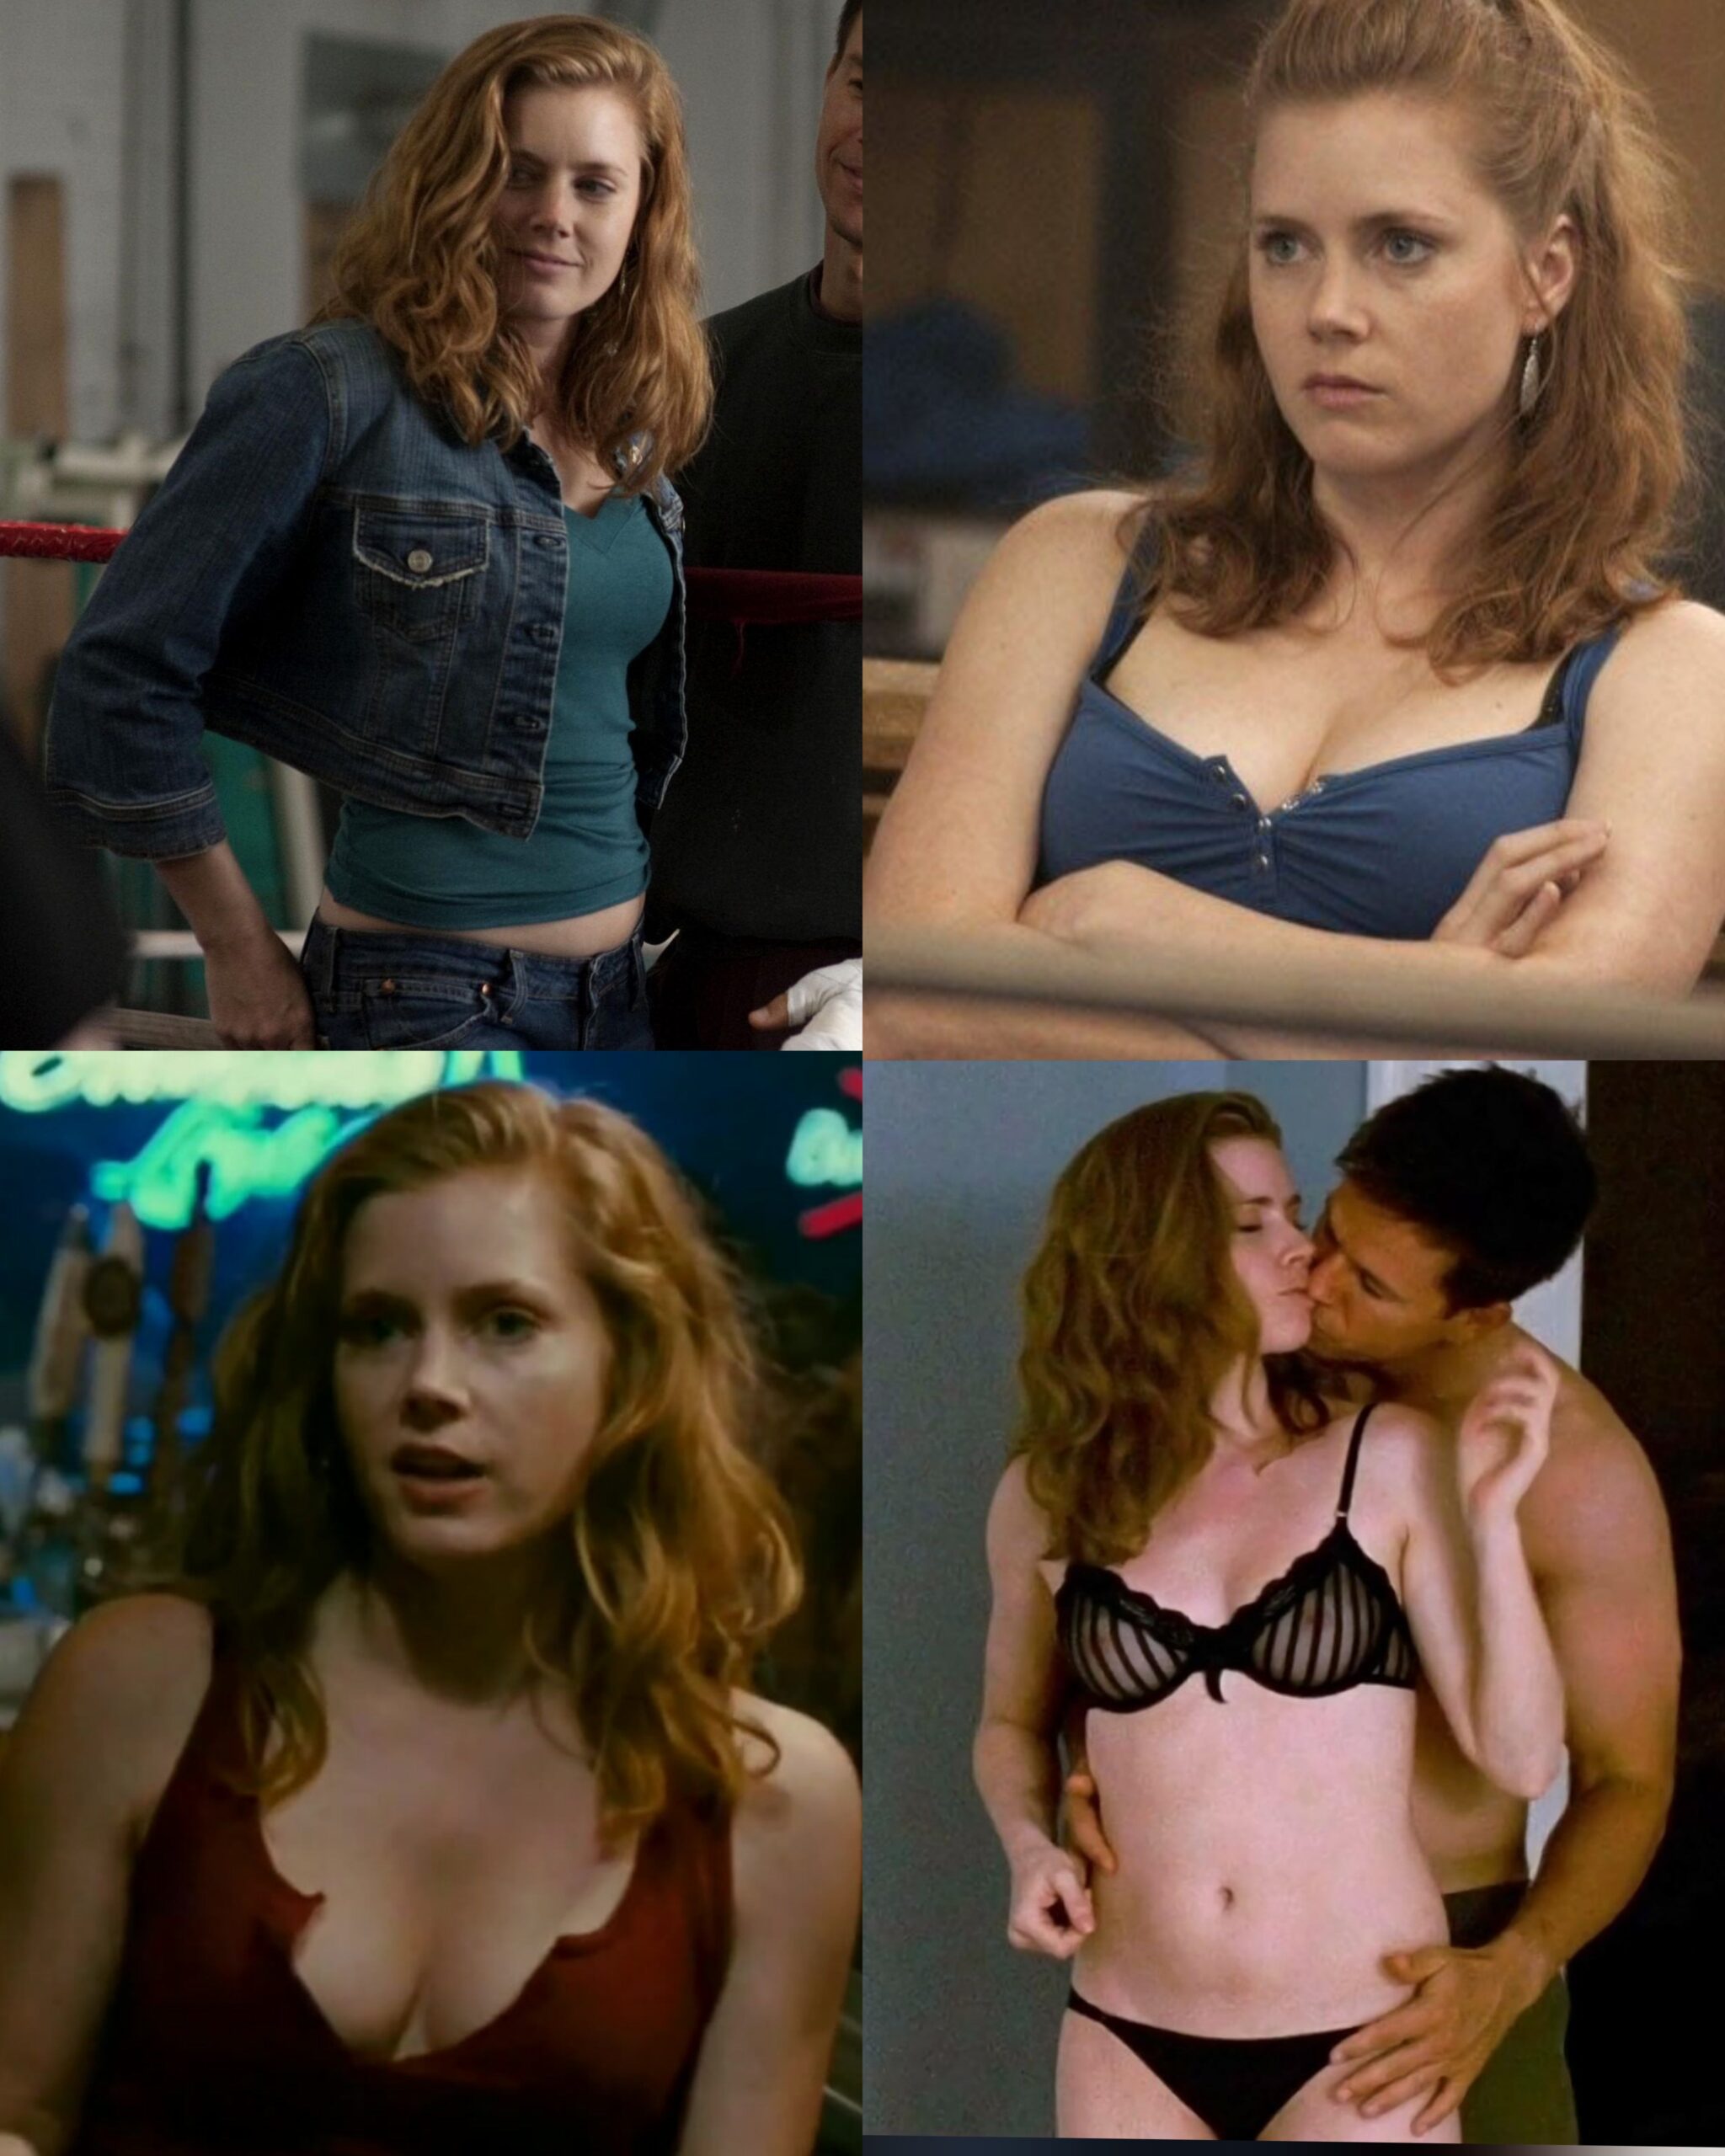 Trashy Amy Adams in The Fighter gets me everytime